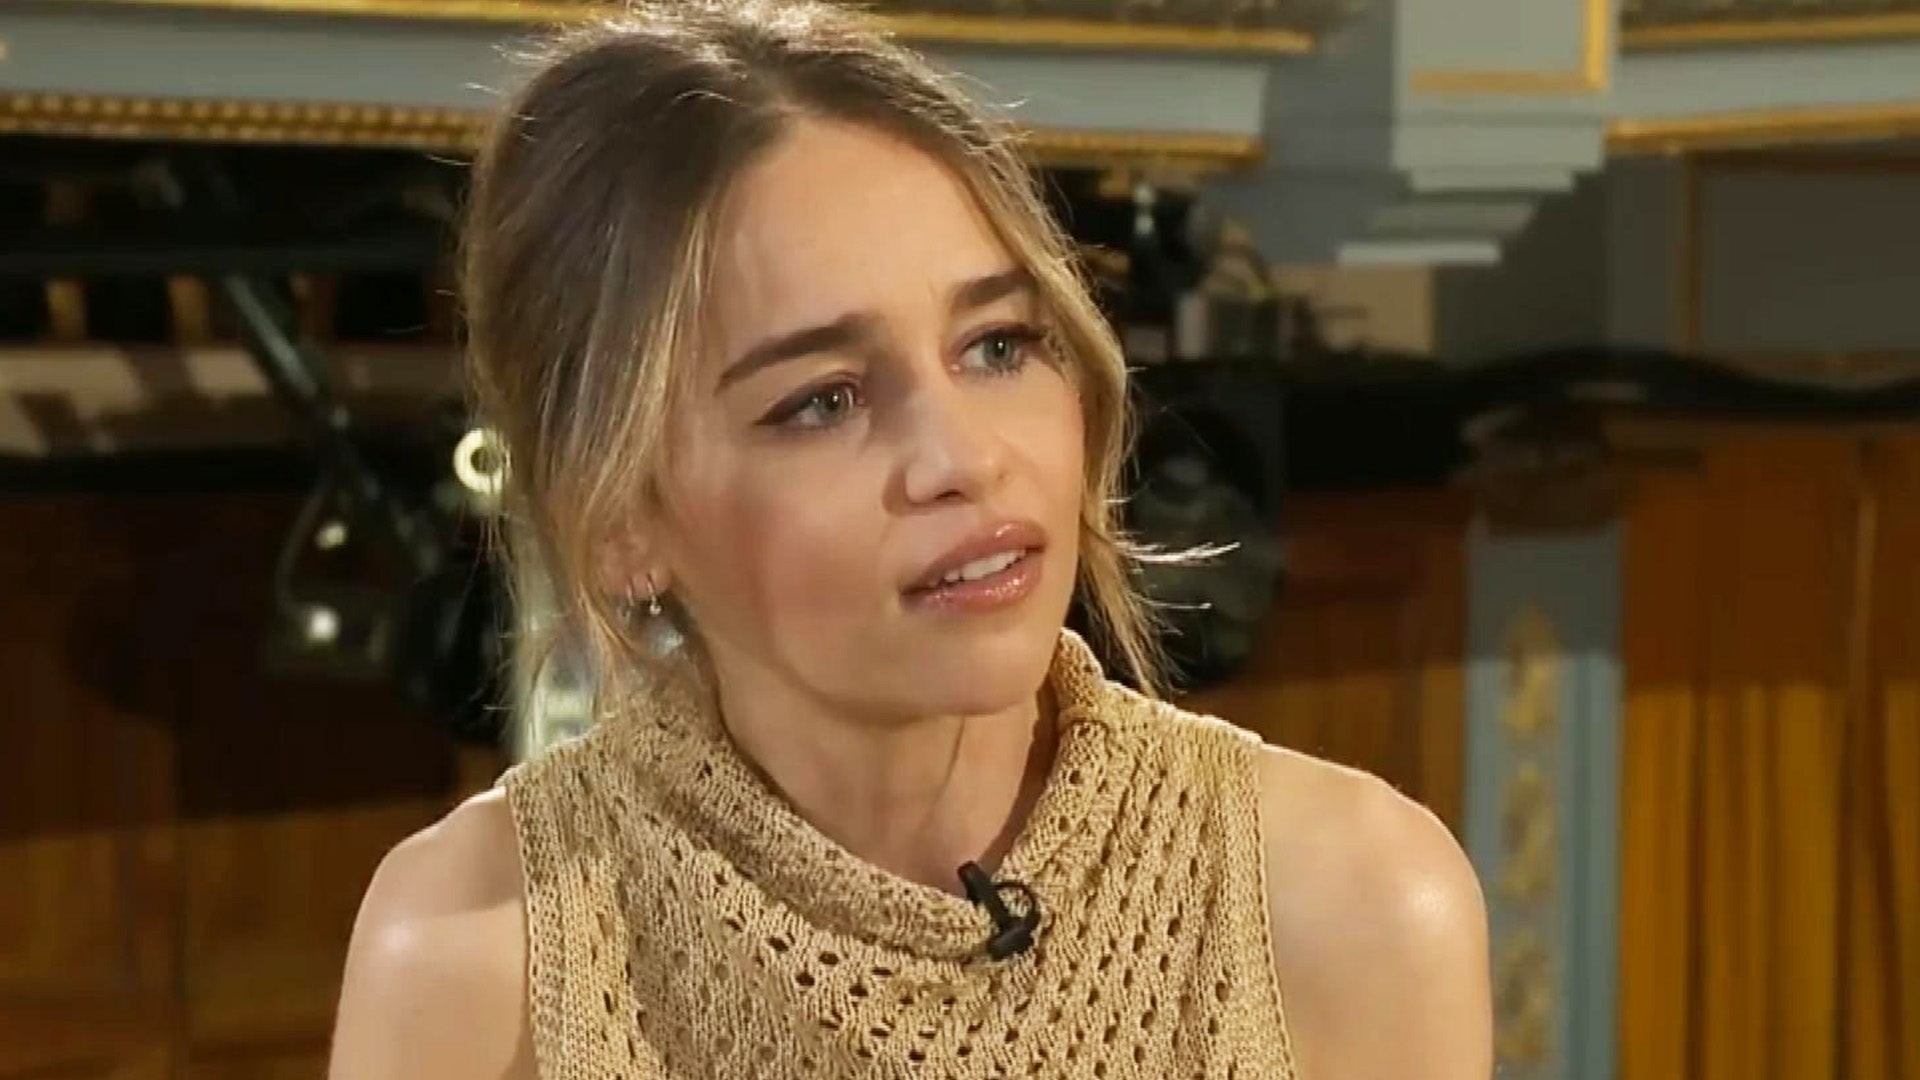 Emilia Clarke Reveals Parts of Her Brain Are 'Missing' After Two Aneurysms